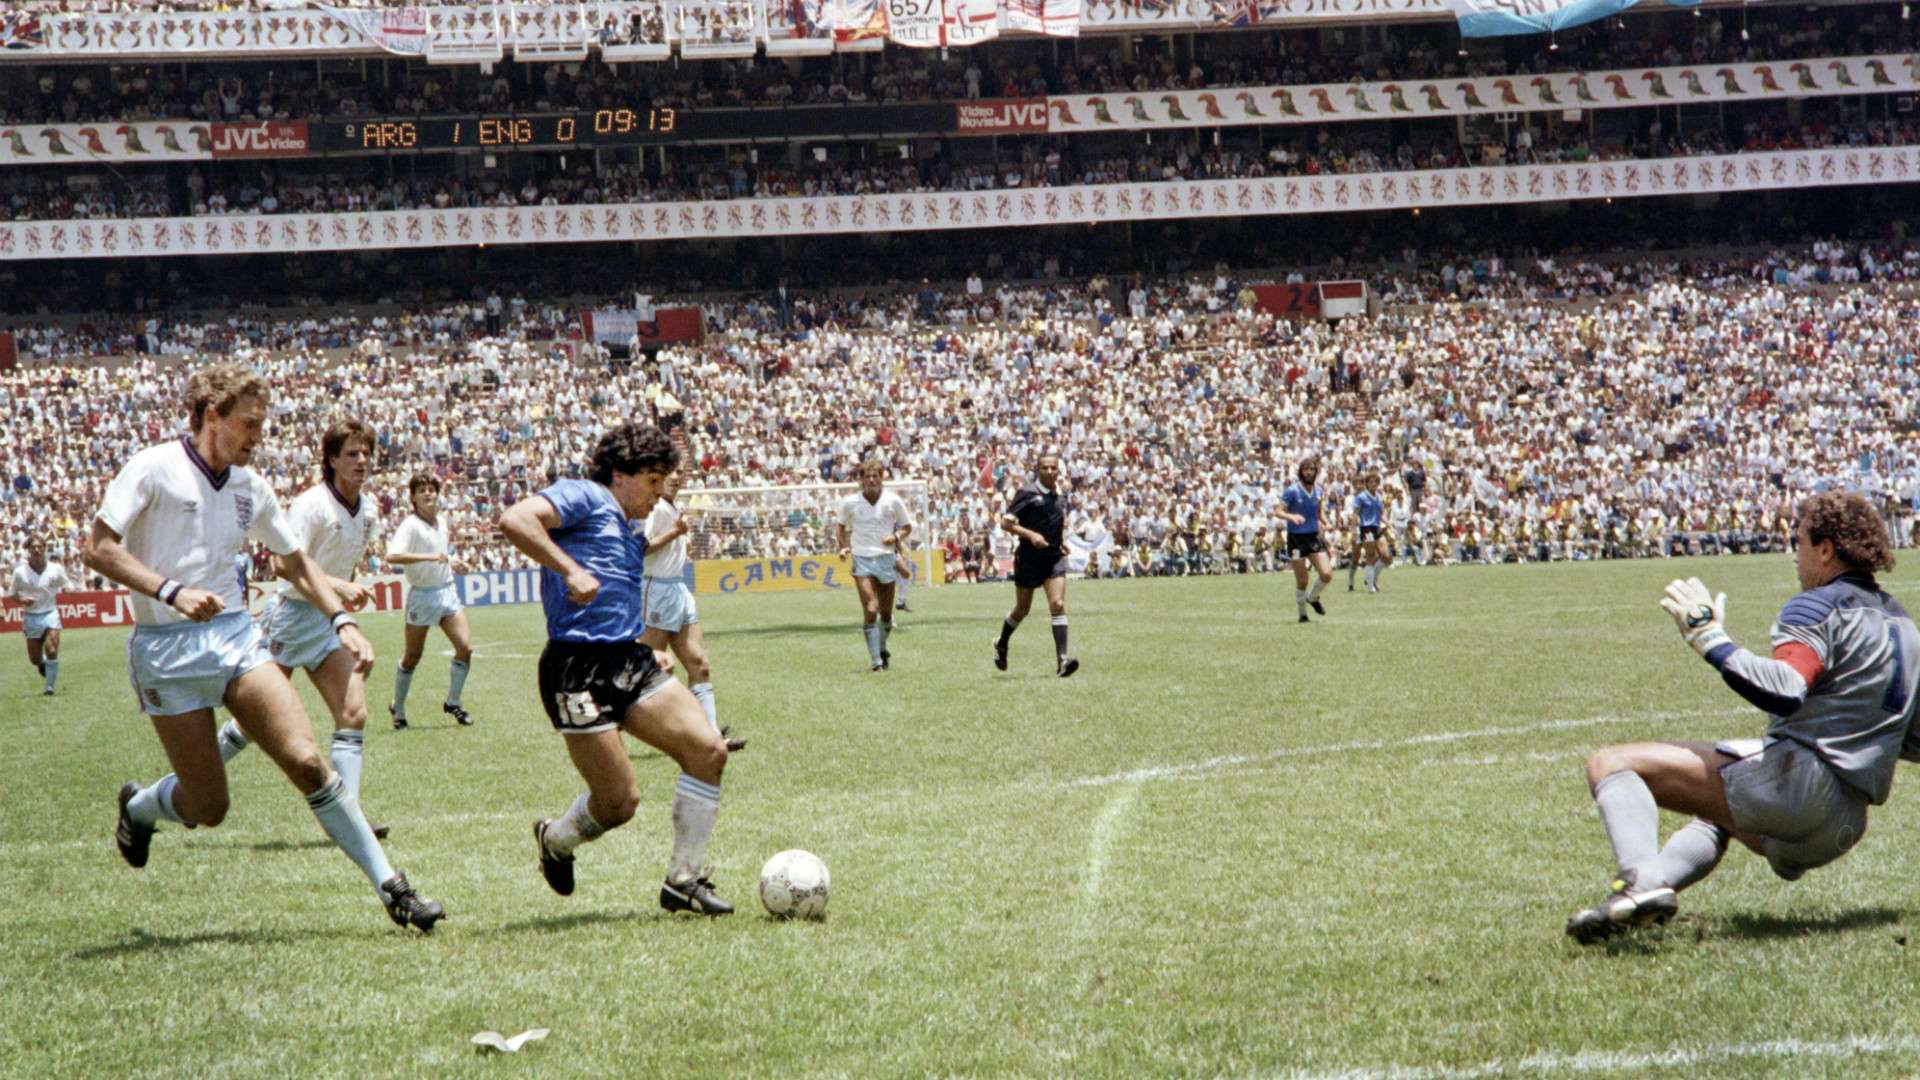 The Hand of God' is why Maradona was hated by some but loved